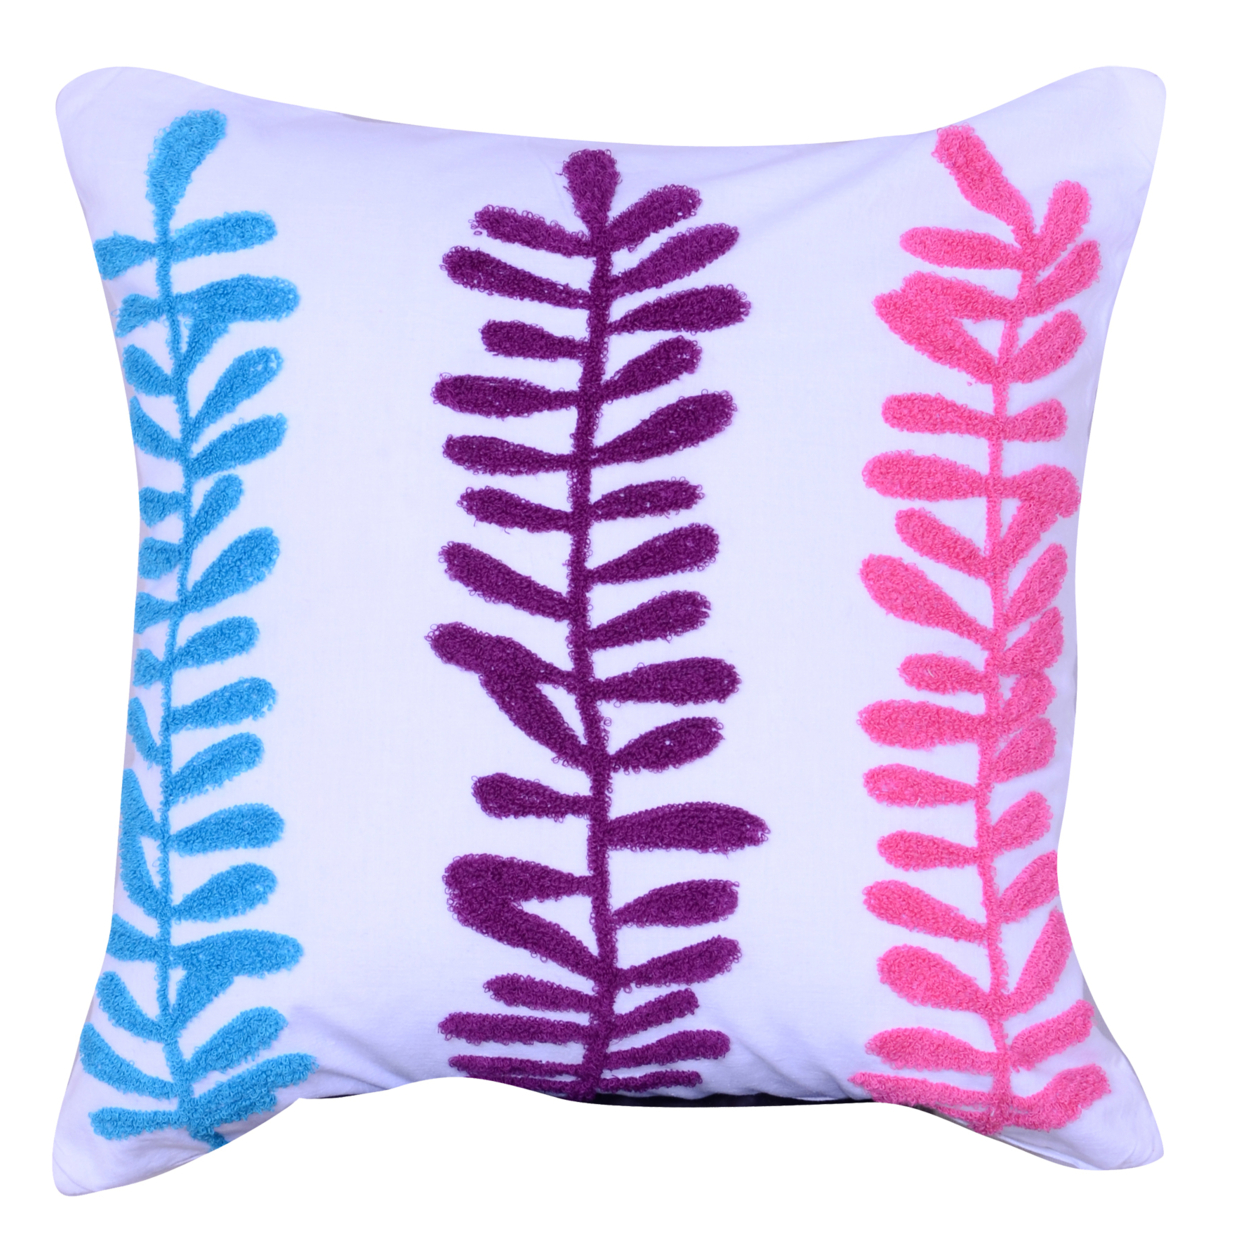 18 X 18 Inch Cotton Pillow With Sprig Pattern Embroidery, Set Of 2, Multicolor- Saltoro Sherpi